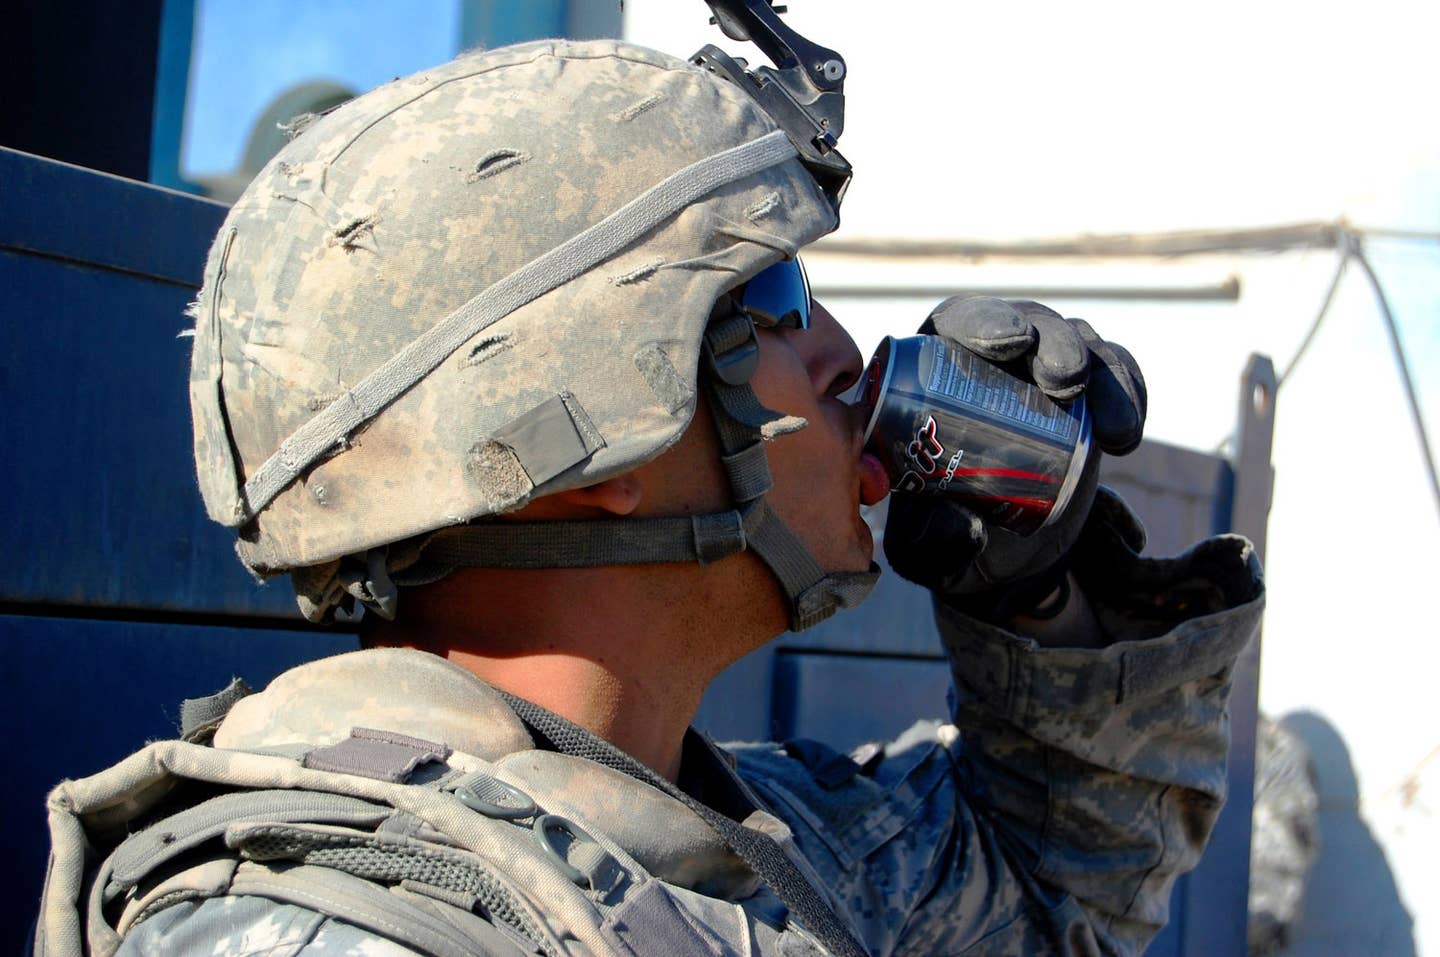 Spc. Kyle Lauth, assigned to Alpha Company, 1st Battalion, 27th Infantry Regiment, sips an energy drink before a dismounted patrol through the Hussainiyah town of the Istaqlal Qada district northeast of Baghdad, Dec. 29, 2008. (Army photo by Sgt. 1st Class JB Jaso)